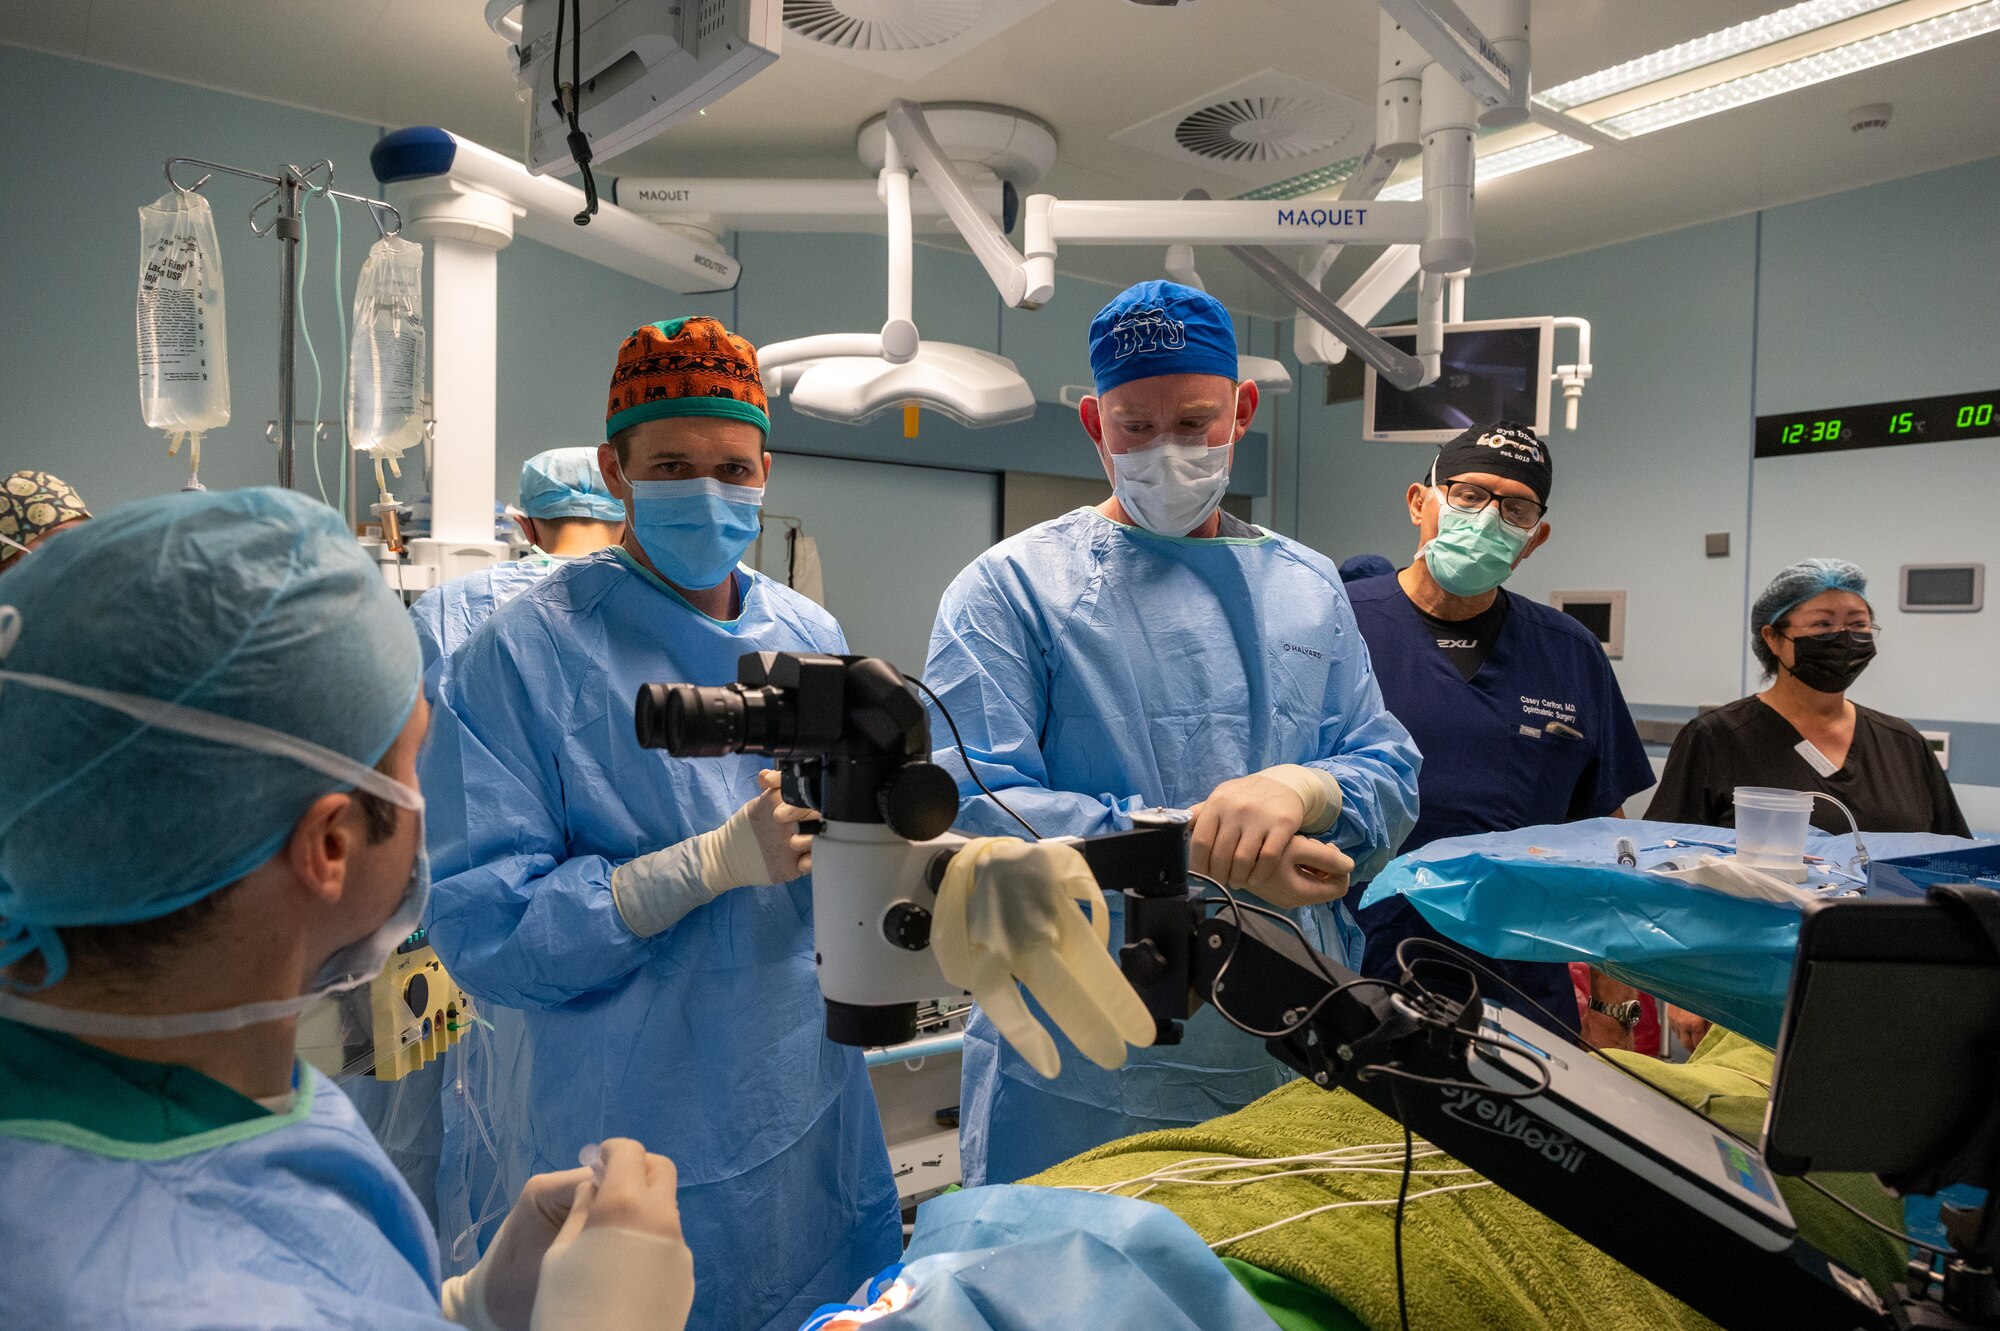 A team of military ophthalmologists discuss surgical approach prior to beginning a cataract surgery.